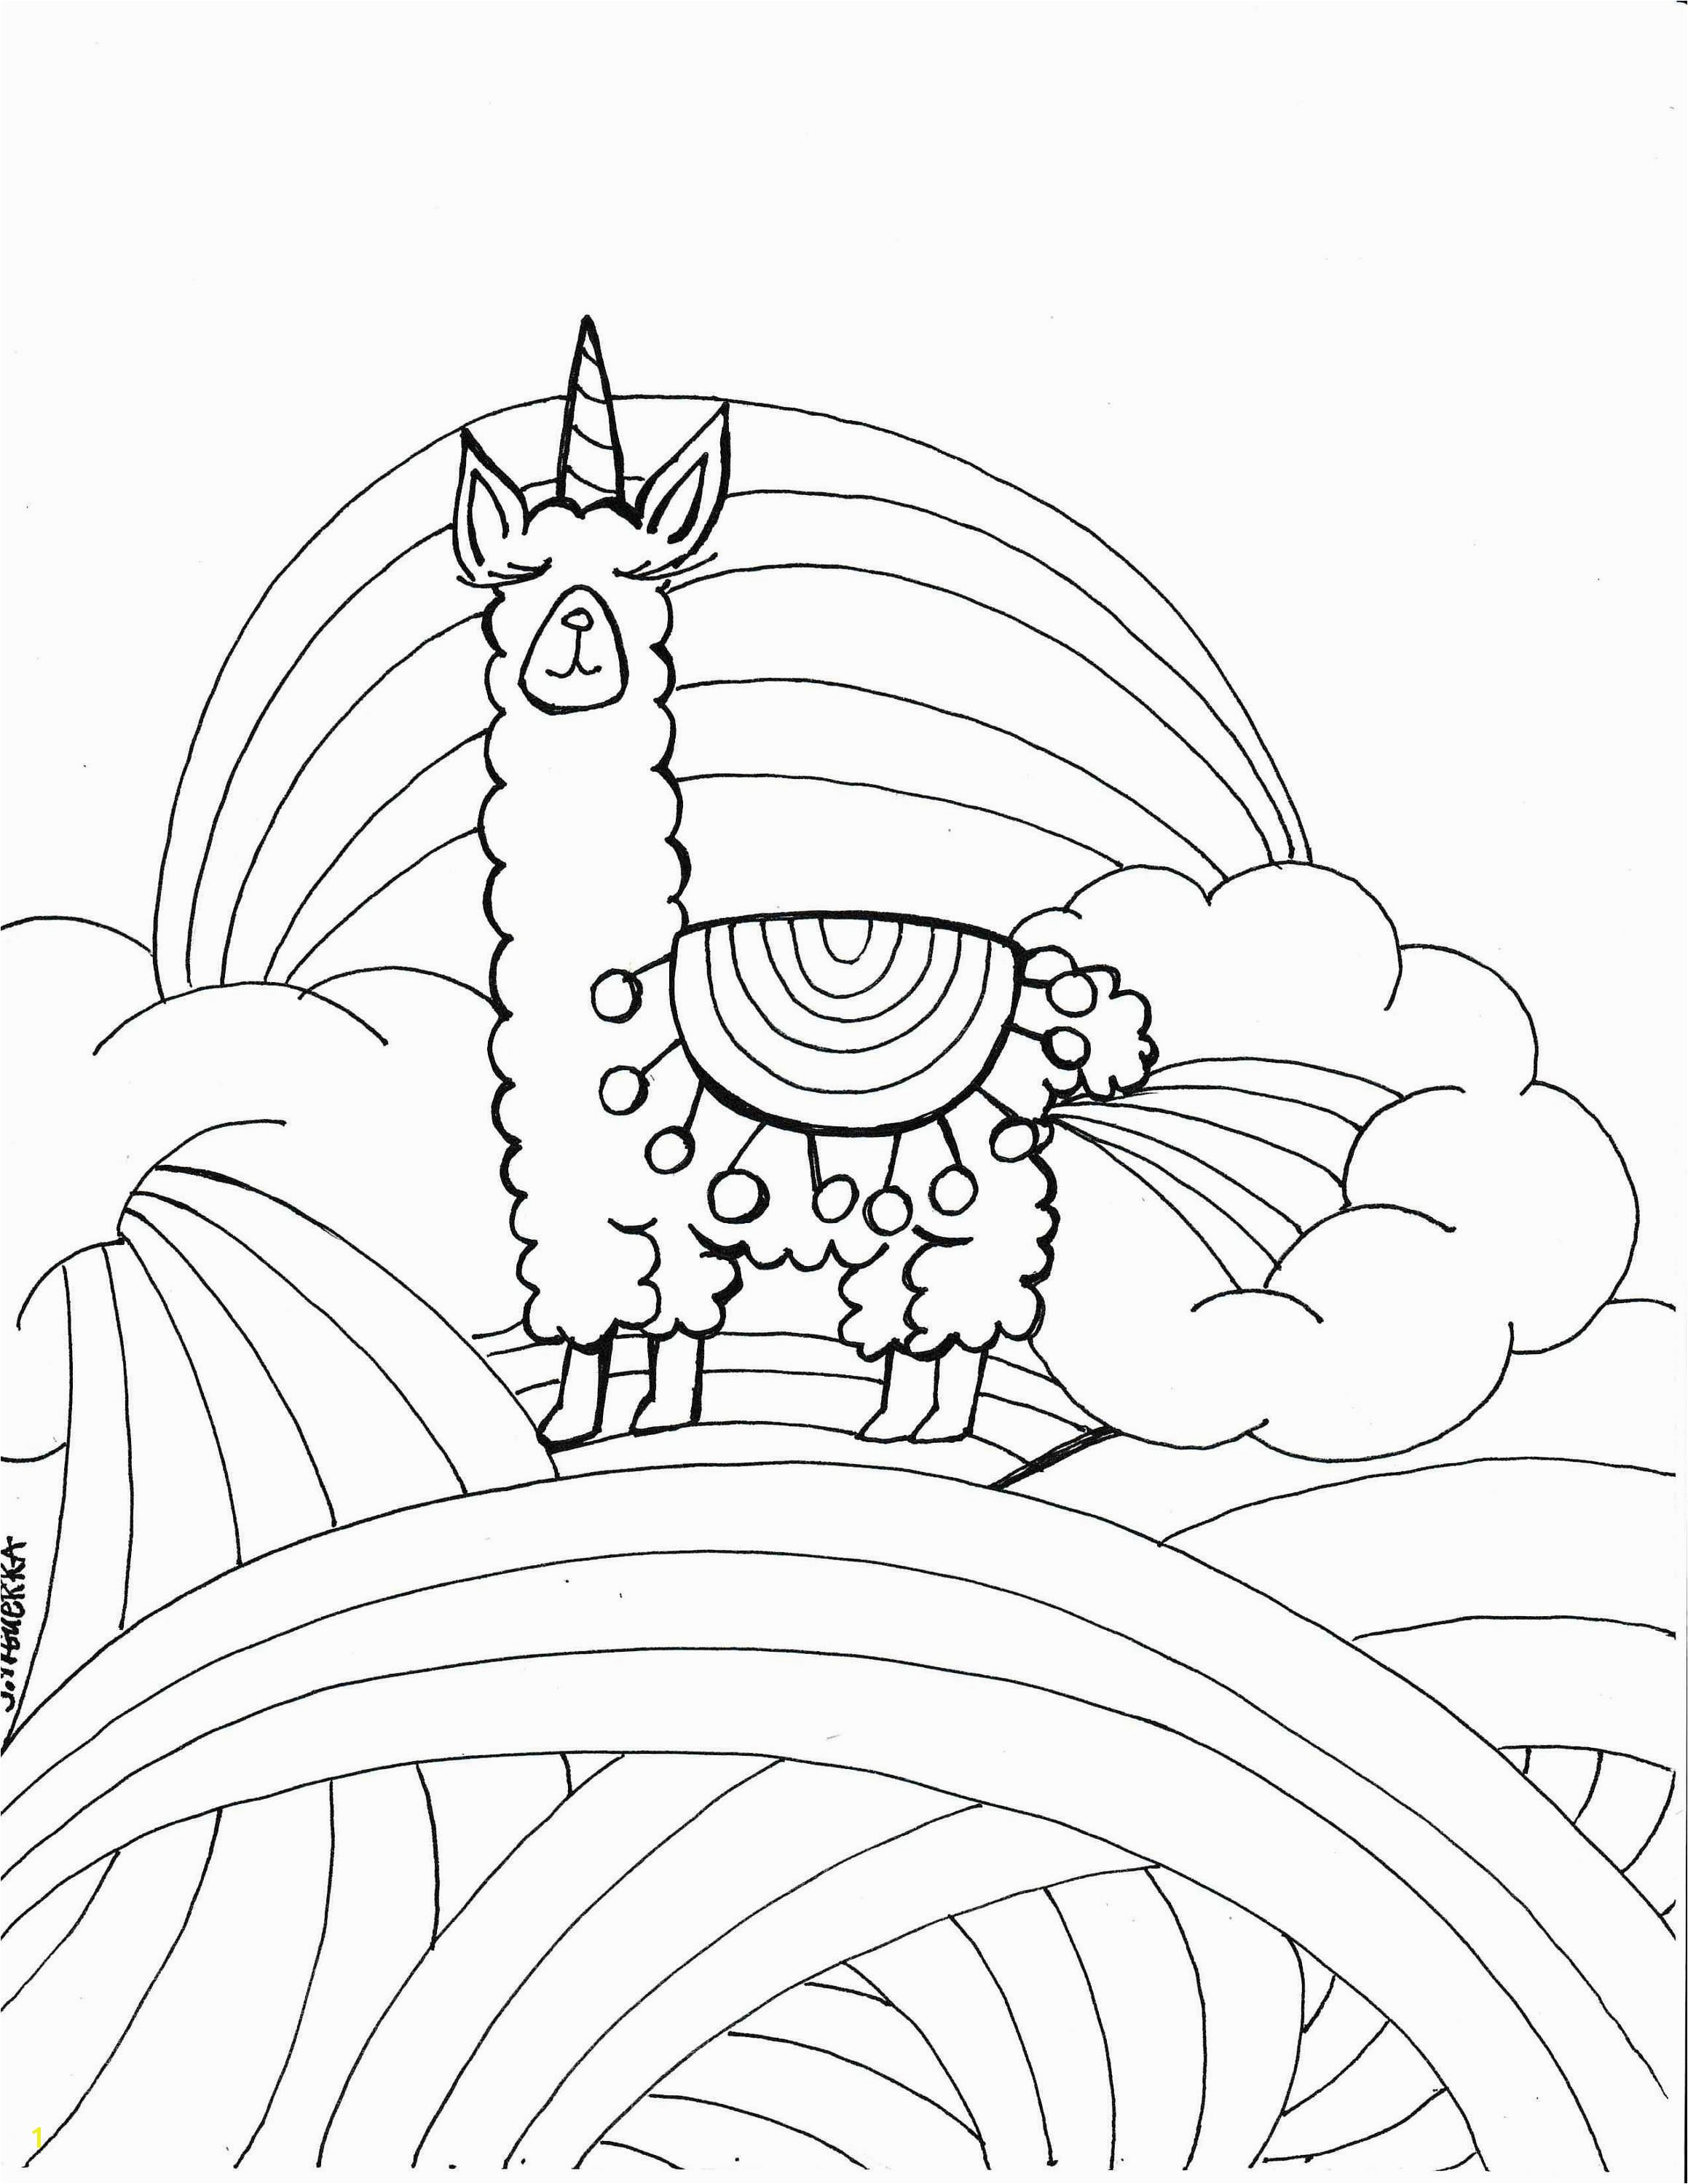 Dirt Bike Coloring Pages Free Bicycle Coloring Page Coloring Pages